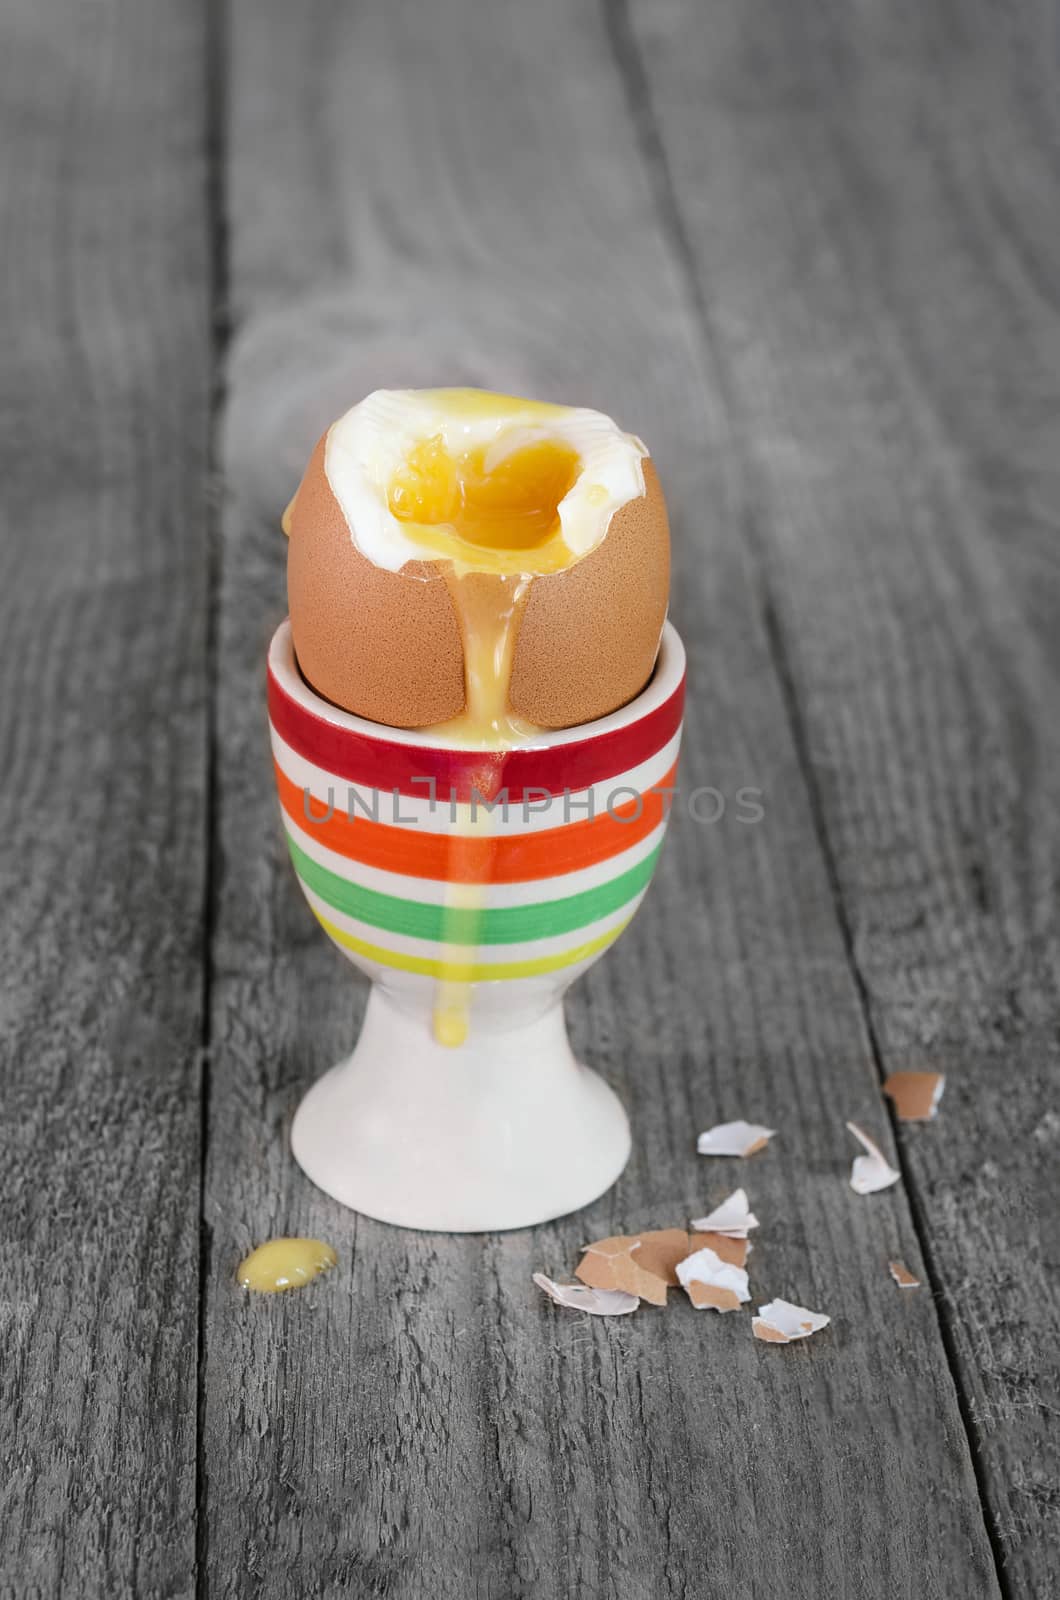 The soft-boiled egg in the stand, on a gray wooden background